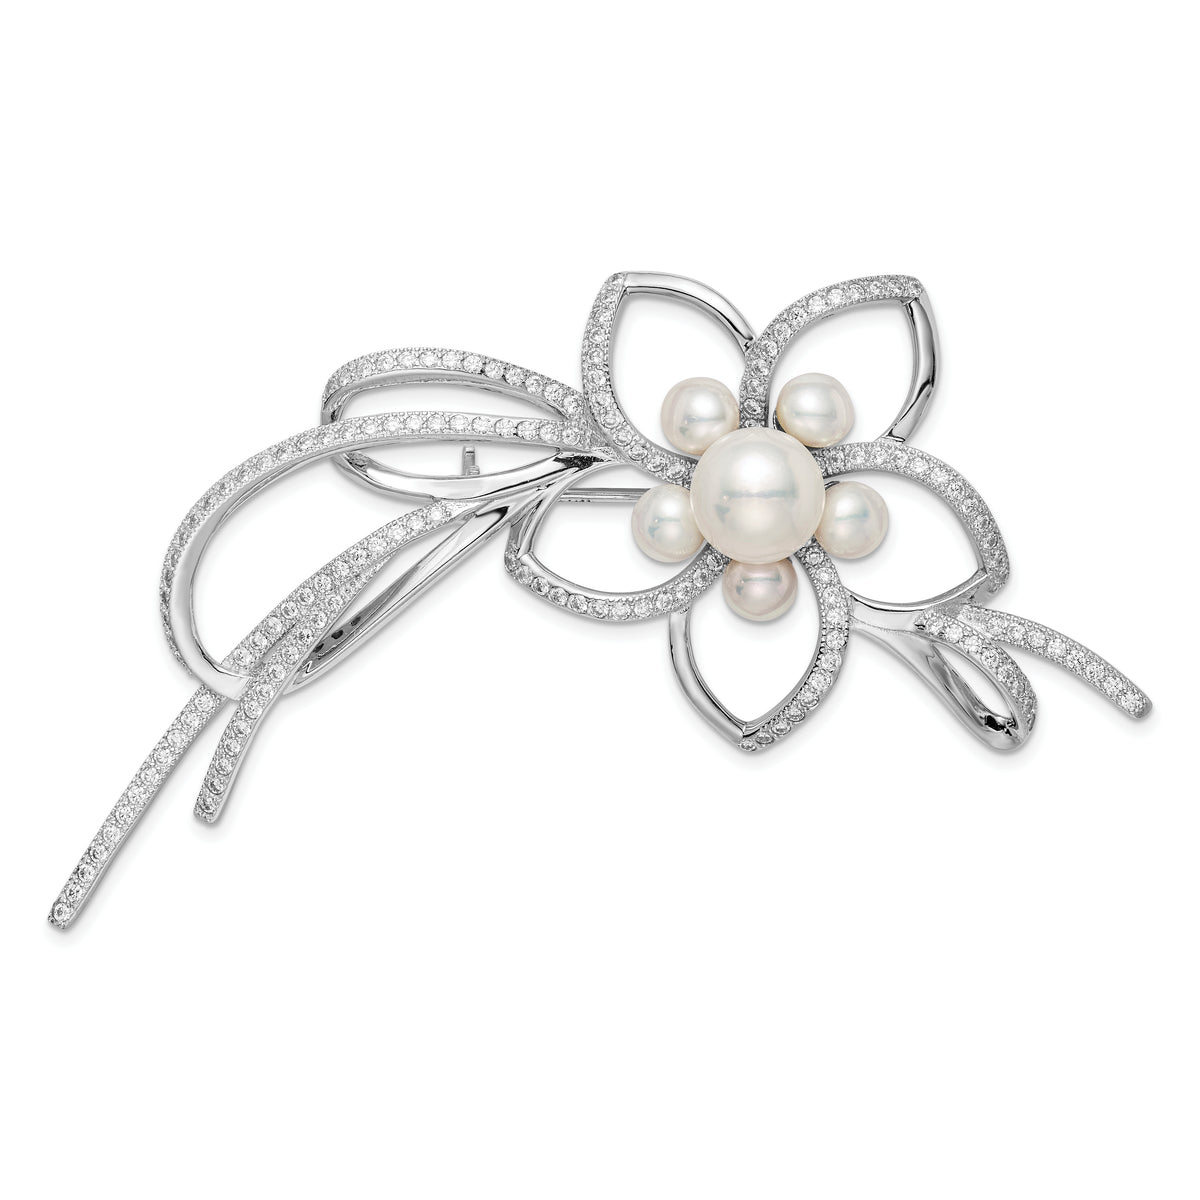 Sterling Silver Rhodium-plated CZ Ribbion and Flower with 4-7mm White Freshwater Cultured Pearls Pin Brooch